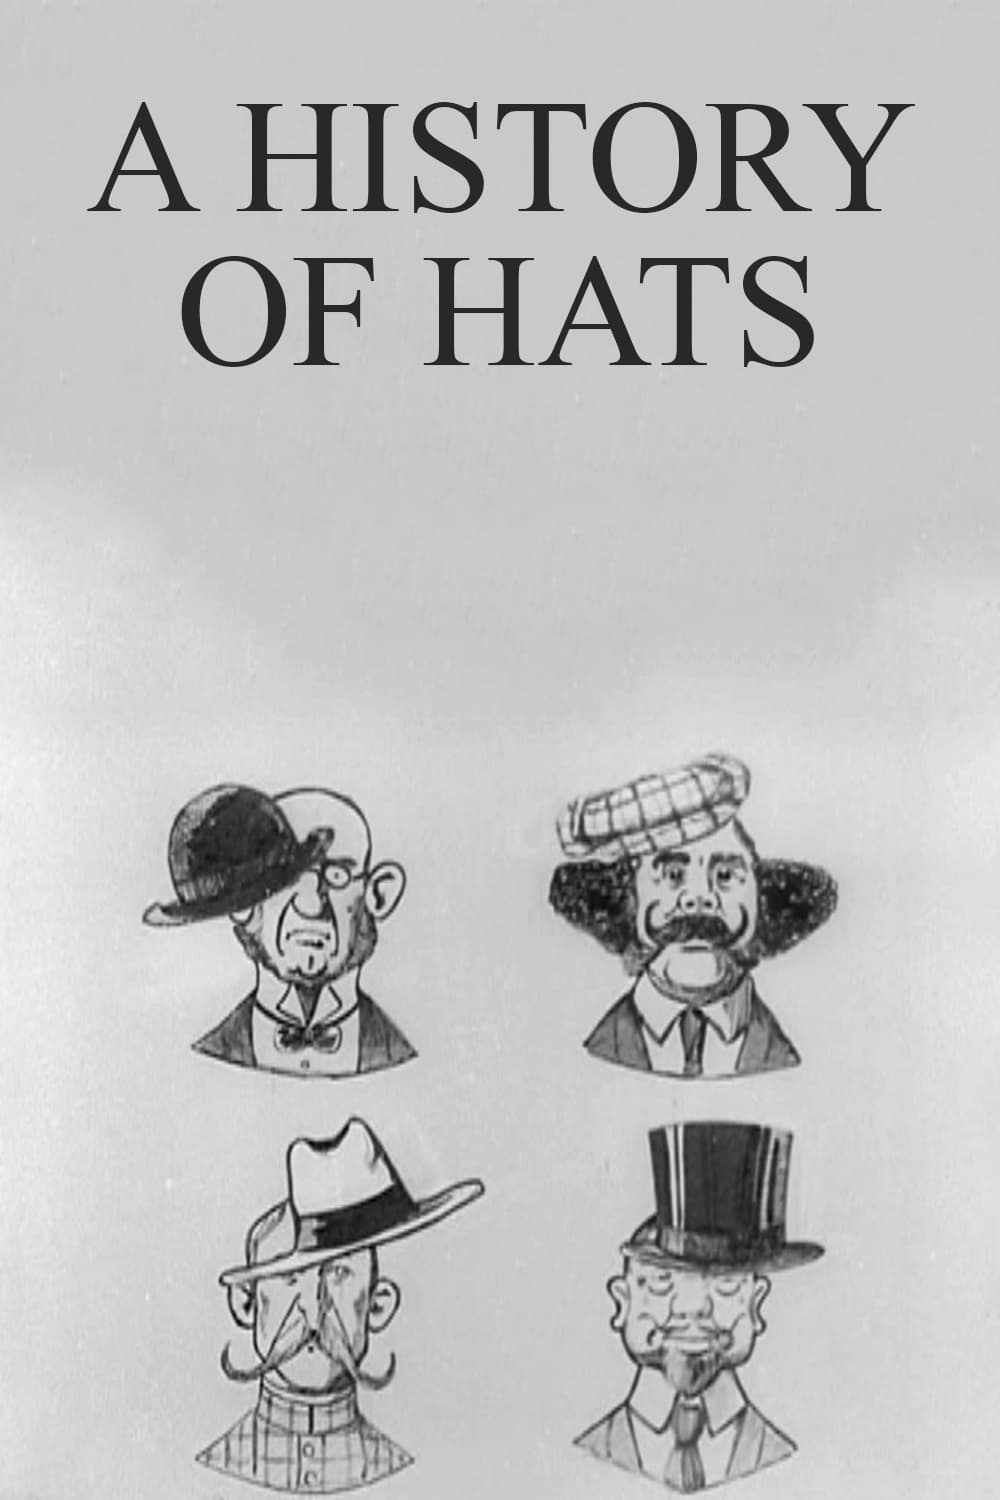 A History of Hats